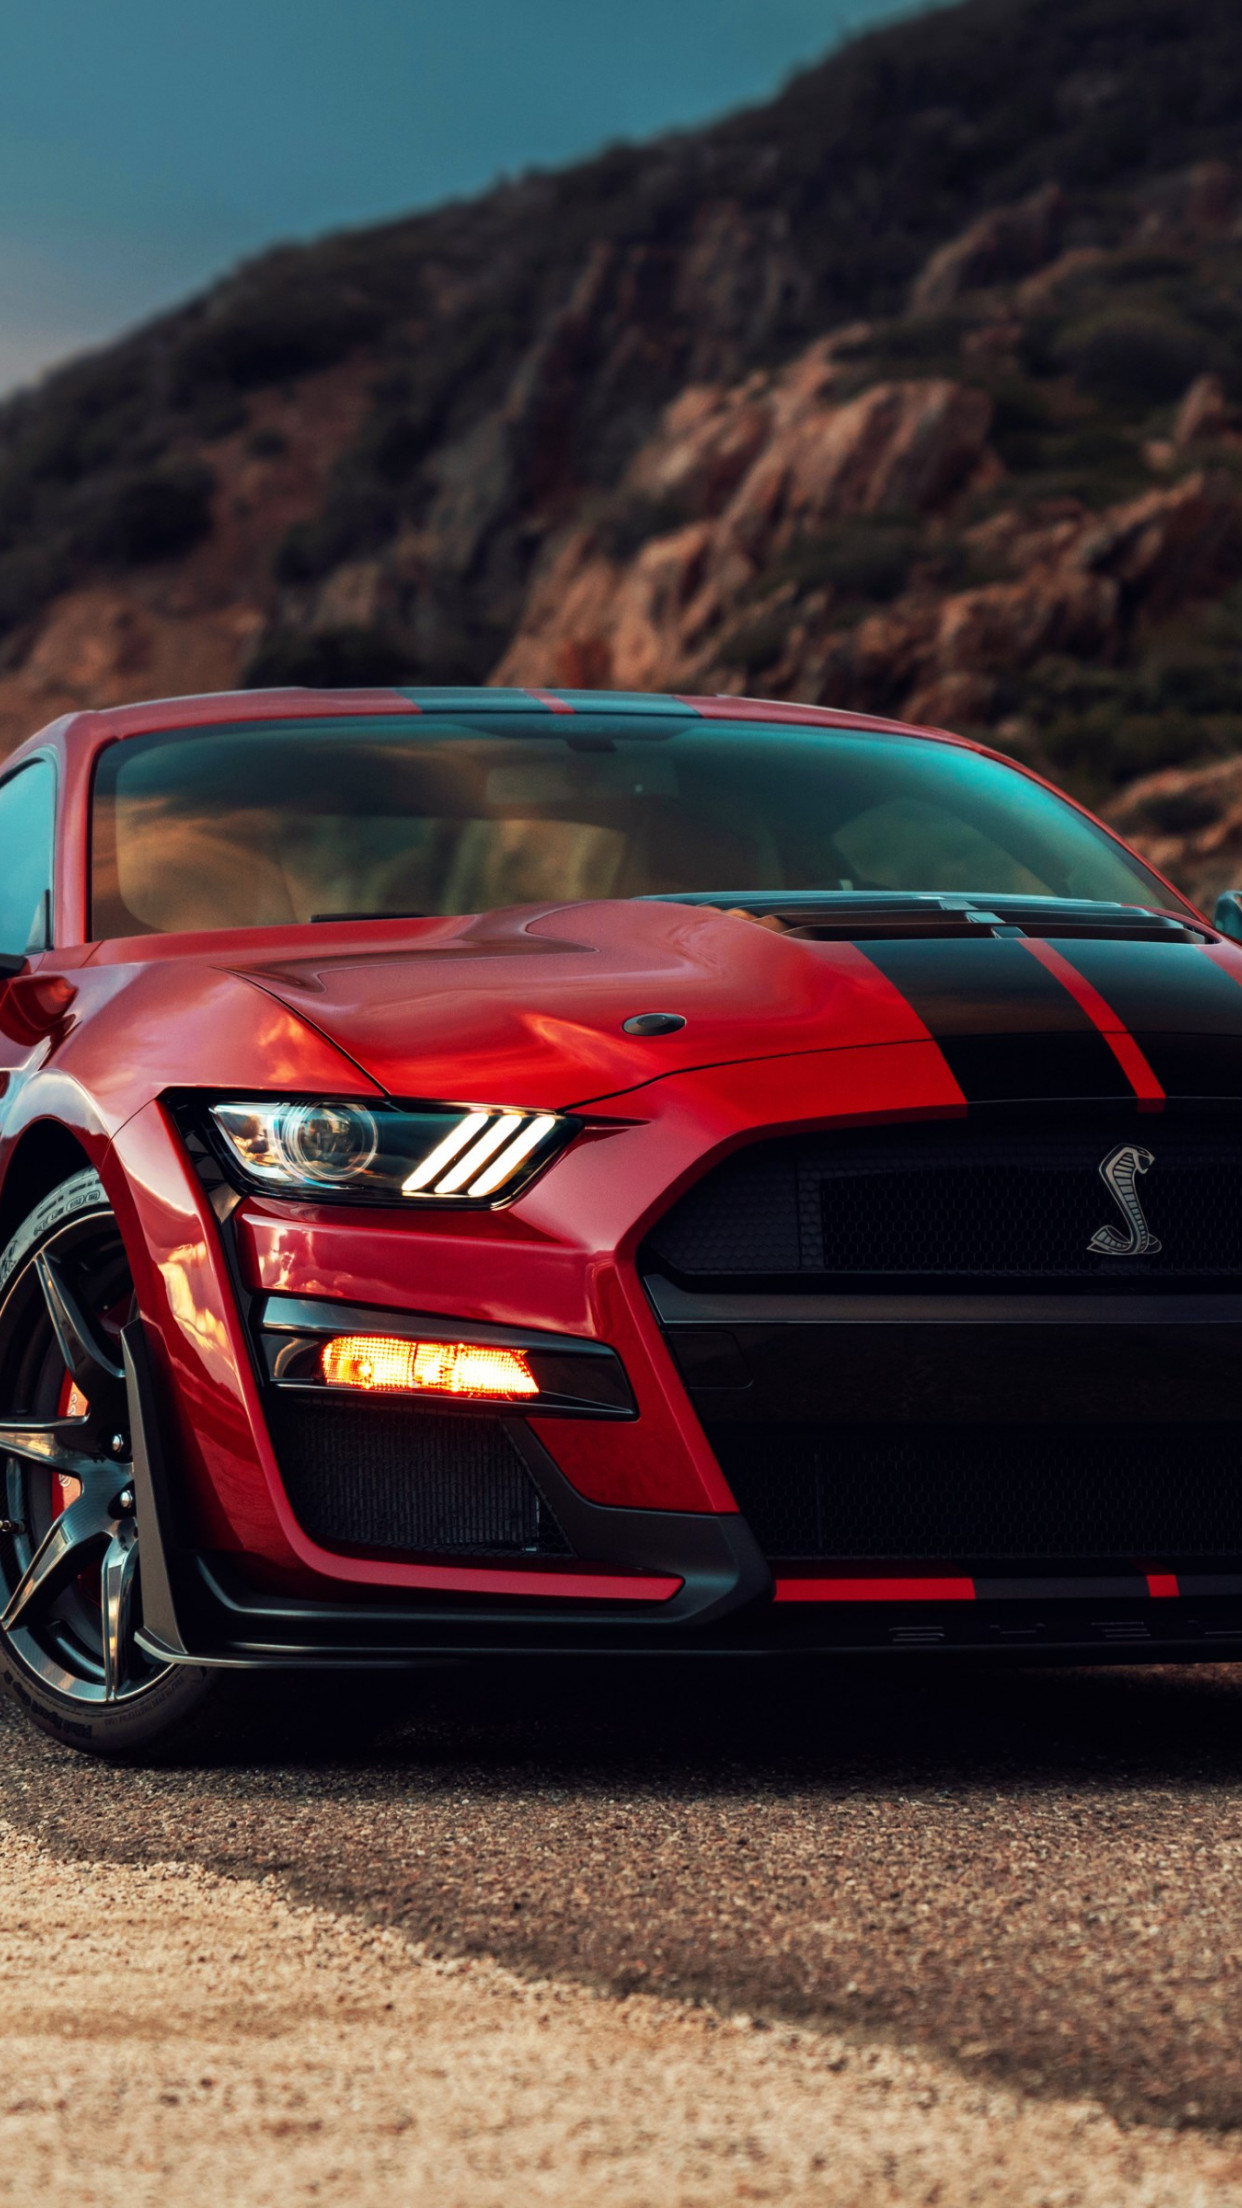 Ford Mustang Shelby GT500 wallpaper 1242x2208